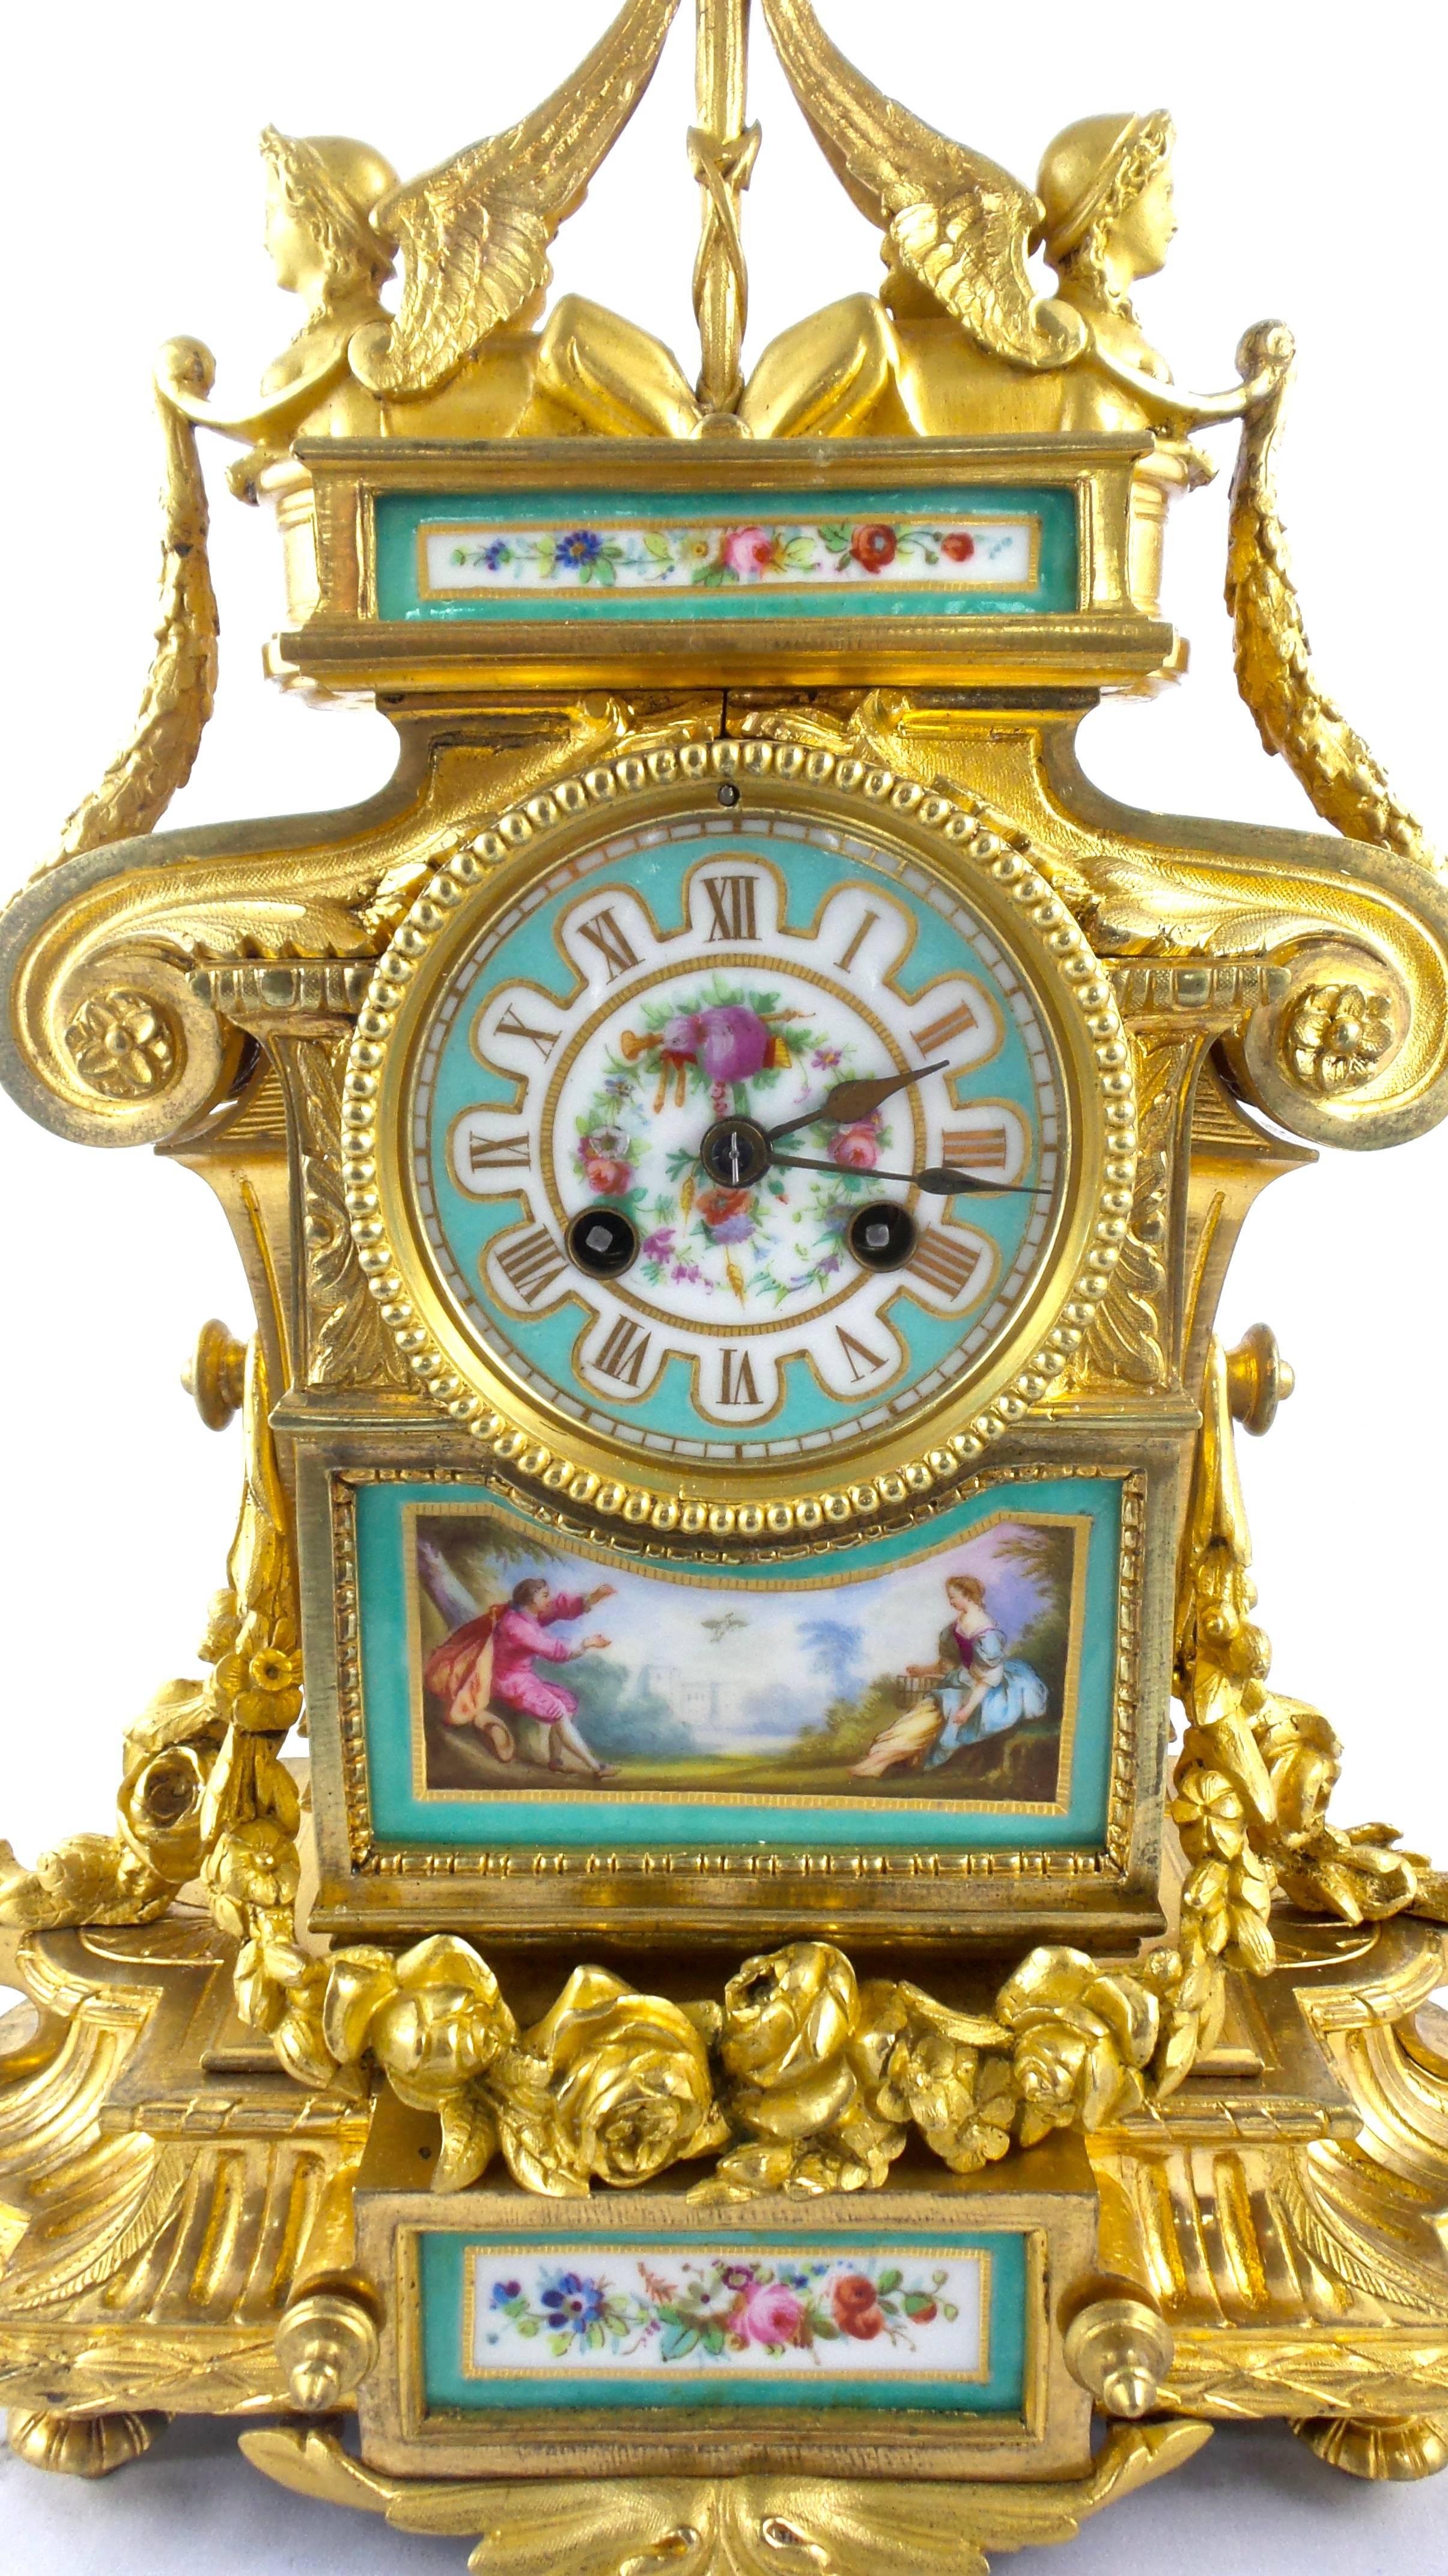 French 19th Century Gilt Ormolu Bronze and Aqua Sevres Porcelain Mantle Clock In Excellent Condition For Sale In Aberdare, GB